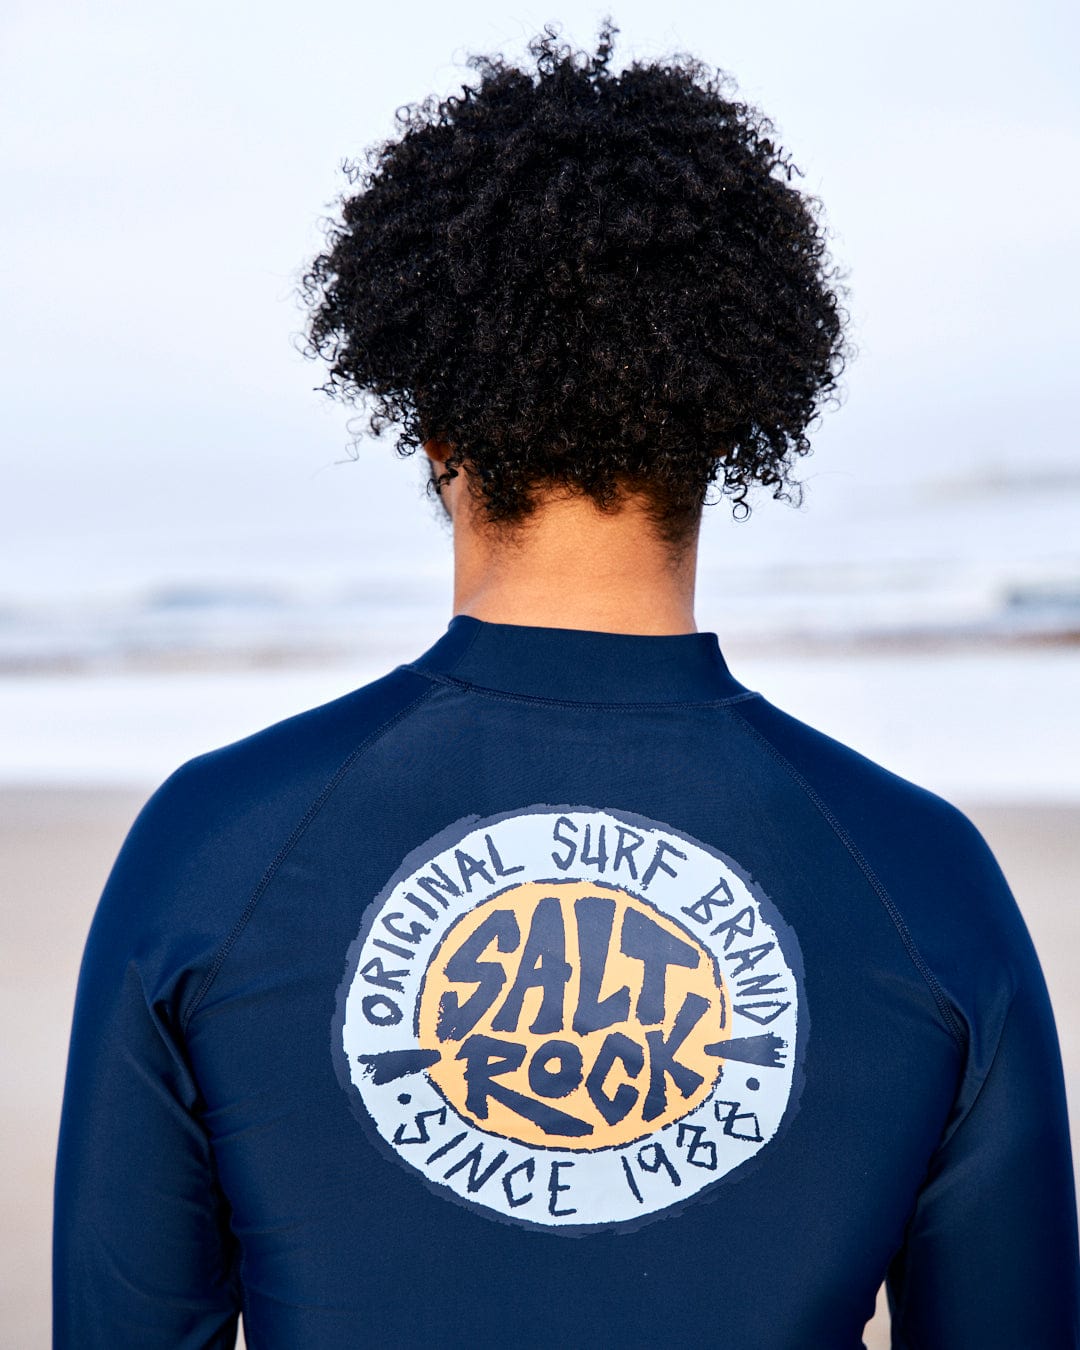 Person wearing SR Original - Recycled Mens Long Sleeve Rashvest - Blue with the Saltrock logo on the back, standing on a beach, facing away from the camera.